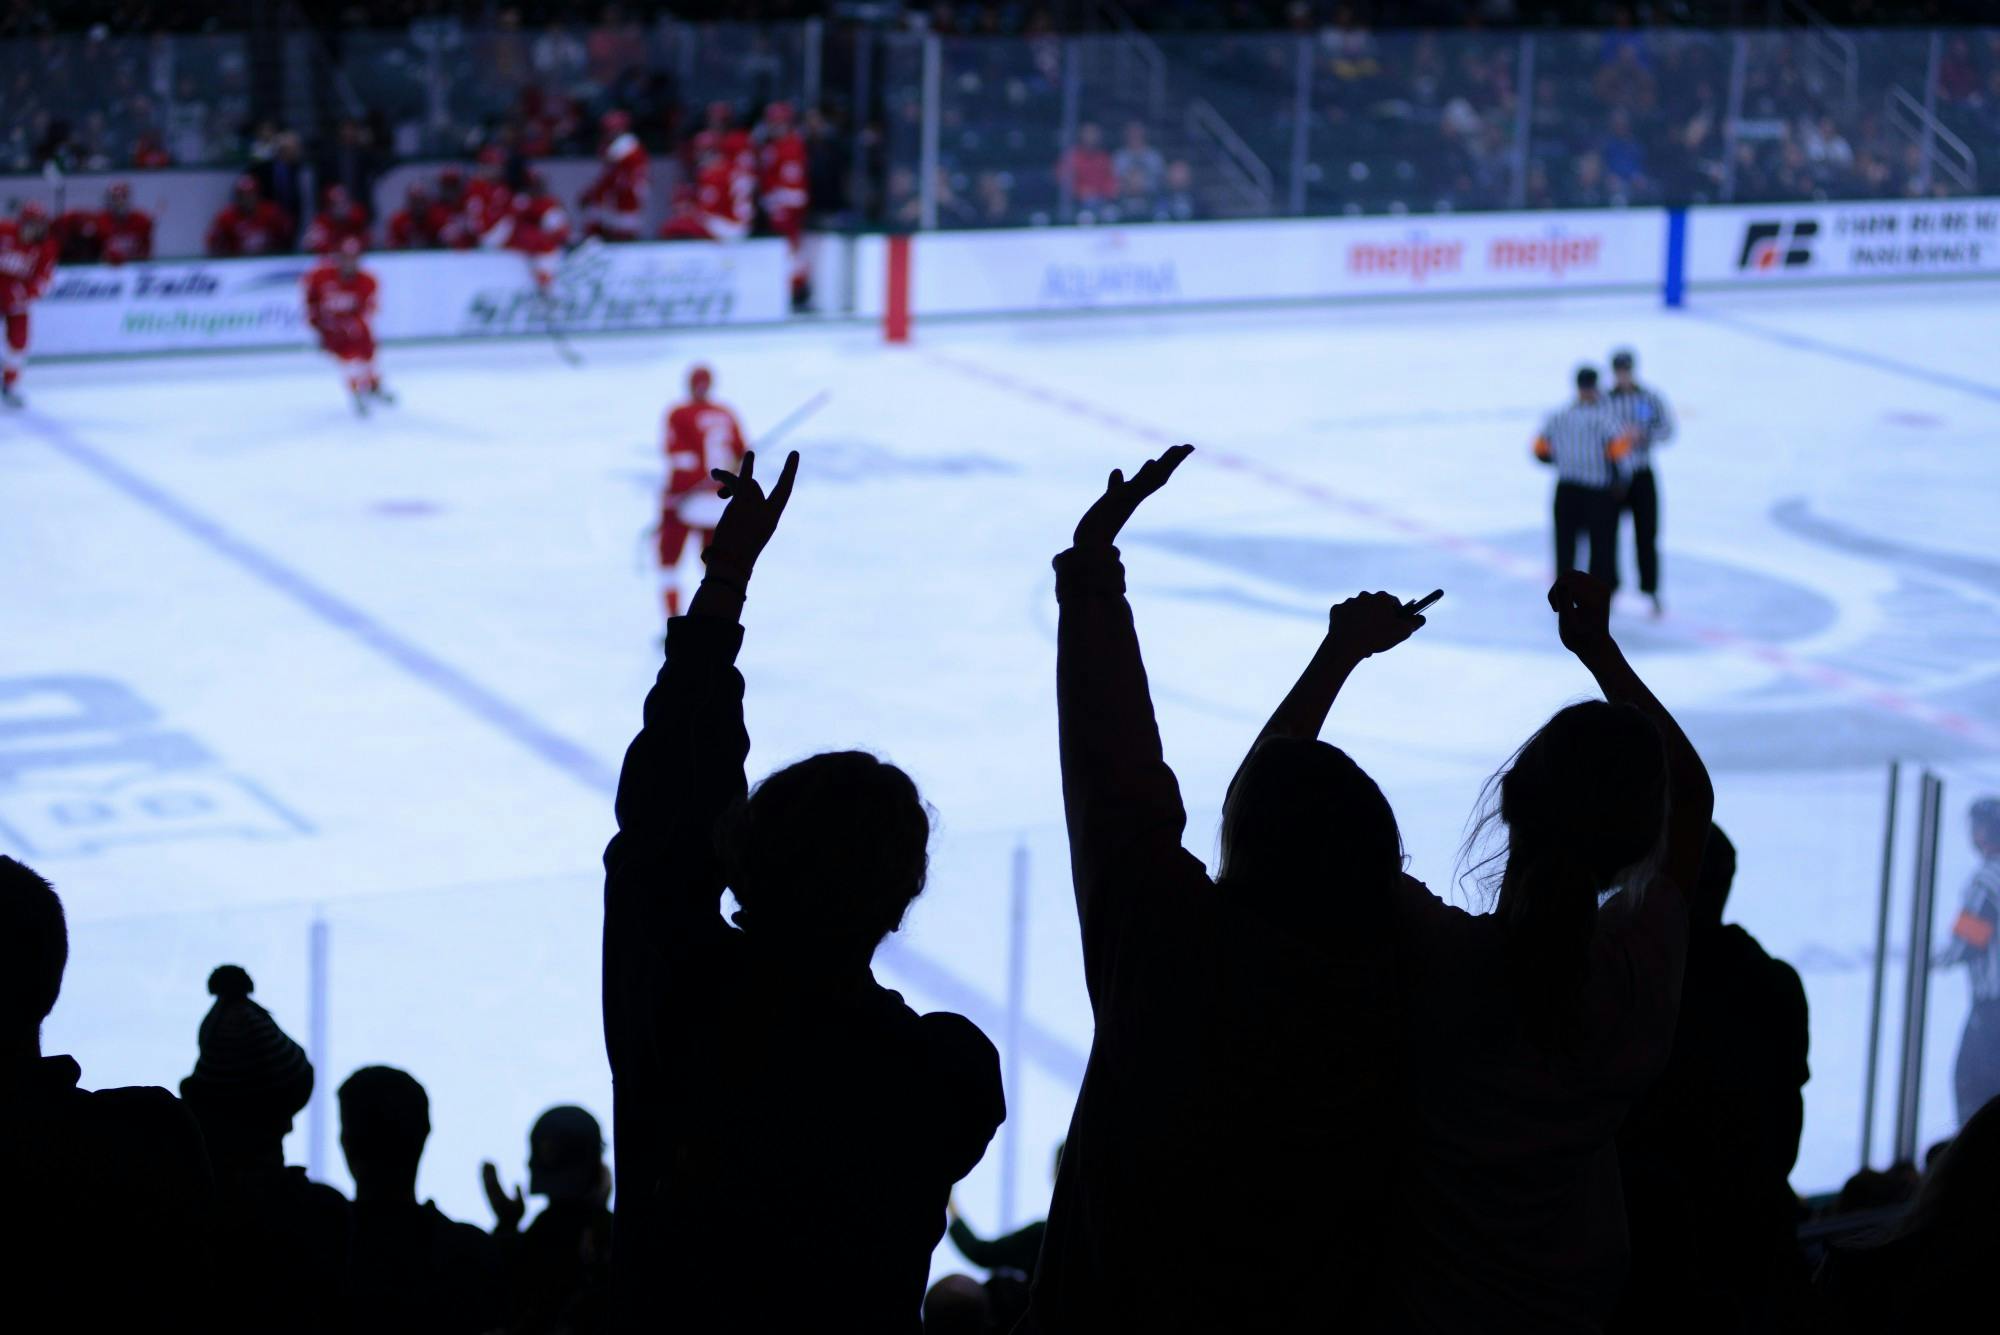  Fans celebrate an MSU goal during the game against Cornell at Munn Ice Arena on Nov. 2, 2019. The Spartans lost to the Big Red, 6-2.